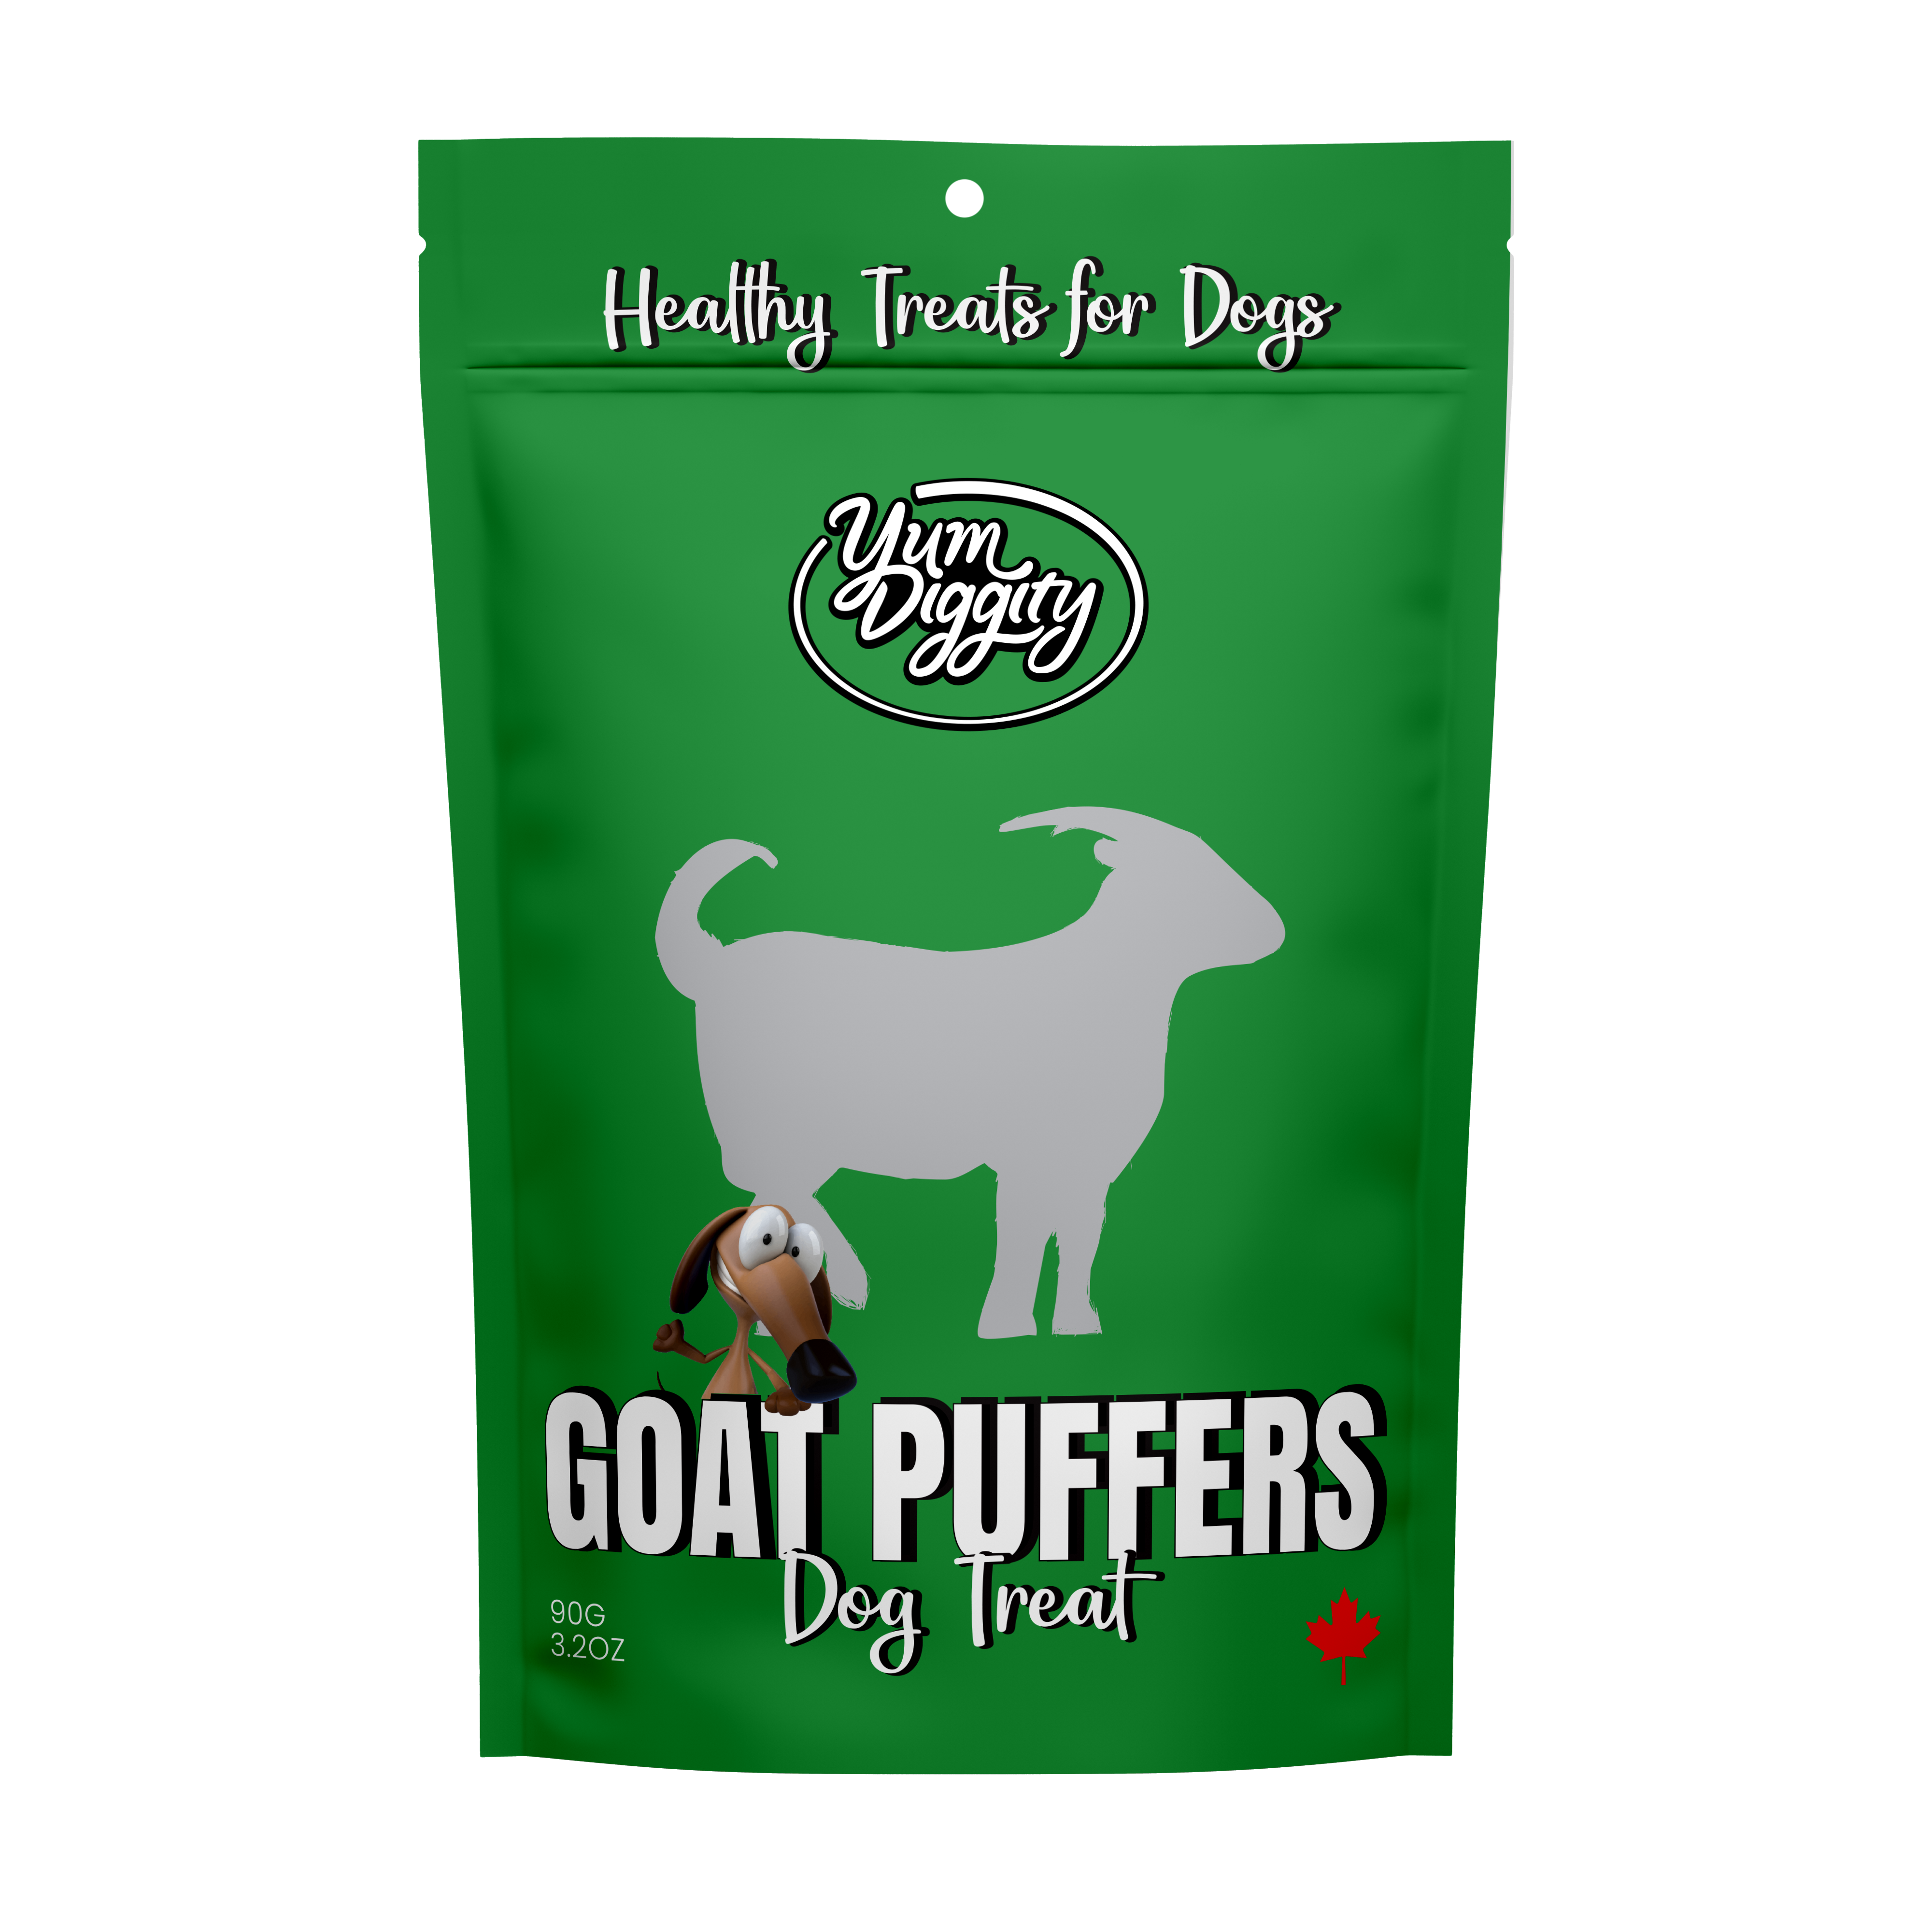 Yum Diggity - Goat "Puffers" Lung Cubes